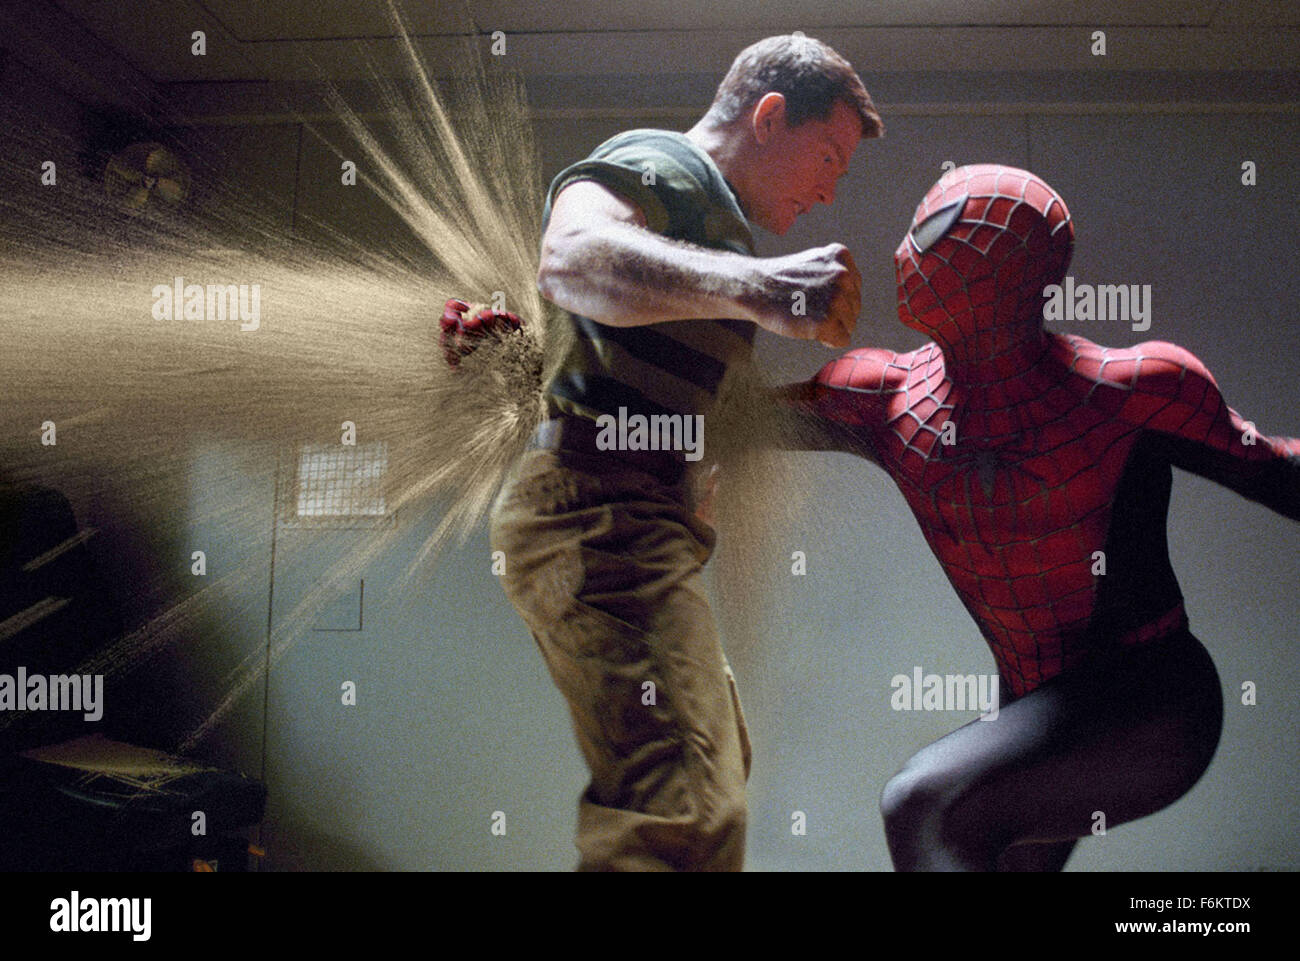 RELEASE DATE: May 4, 2007. MOVIE TITLE: Spider-Man 3 - STUDIO: Columbia Pictures/Sony Pictures Entertainment. PLOT: A strange black entity from another world bonds with Peter Parker and causes inner turmoil as he contends with new villains, temptations, and revenge. PICTURED: THOMAS HADEN CHURCH, and TOBEY MAGUIRE stars as Peter Parker. Stock Photo